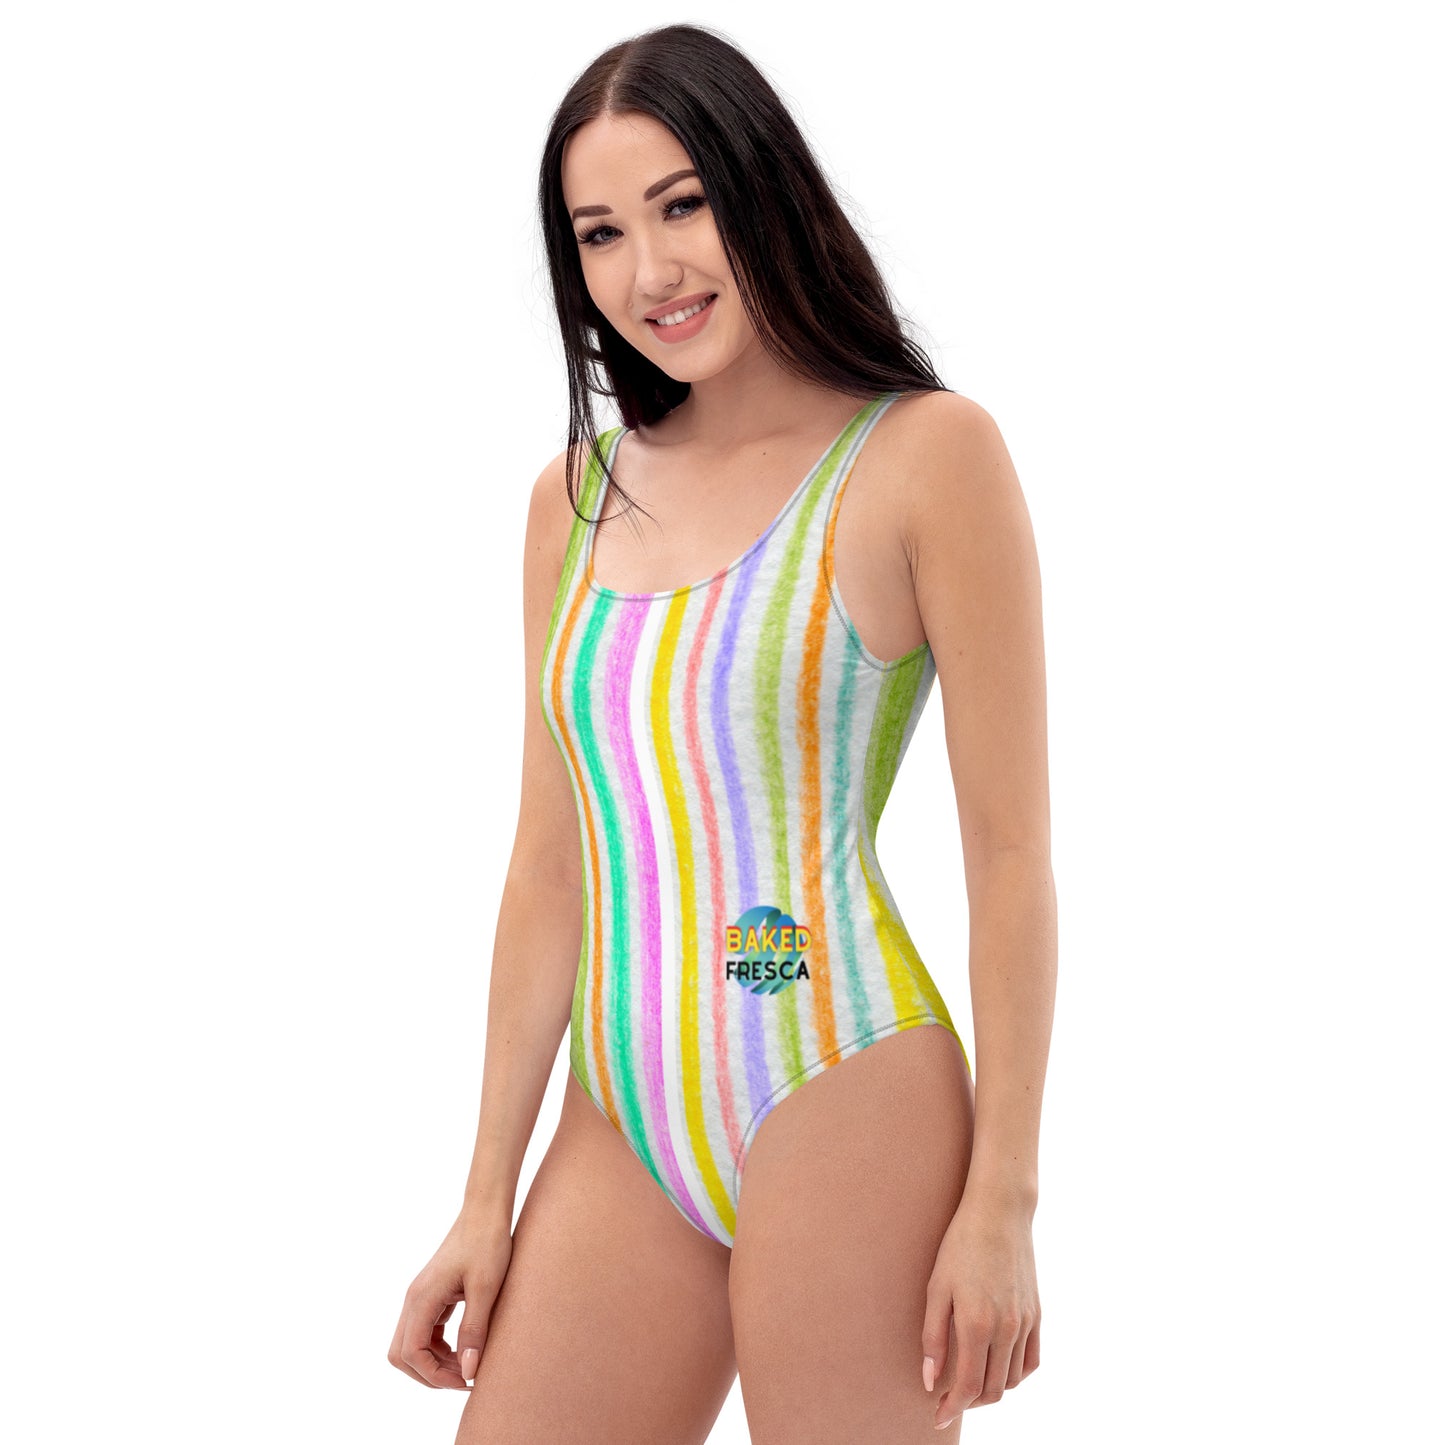 70's Crayon One-Piece Swimsuit by Baked Fresca